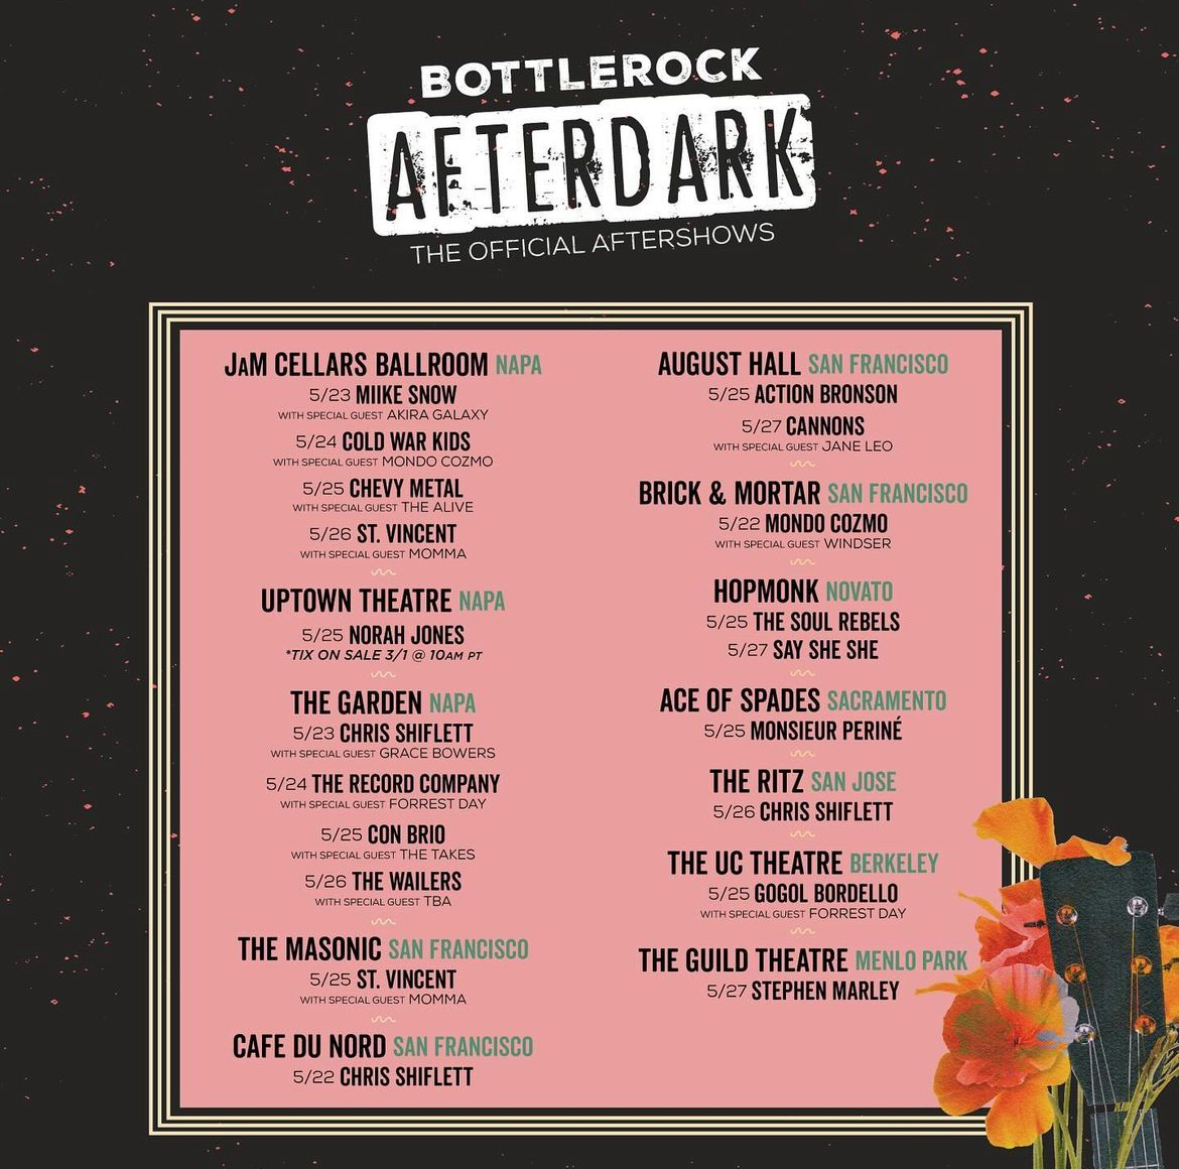 JUST ANNOUNCED: BottleRock AfterDark ✨ Catch @ColdWarKids, @cannonstheband, @NorahJones, @st_vincent + more around the Bay this May ✌️ On sale 2/28 at 10am: bit.ly/3P3qX5d